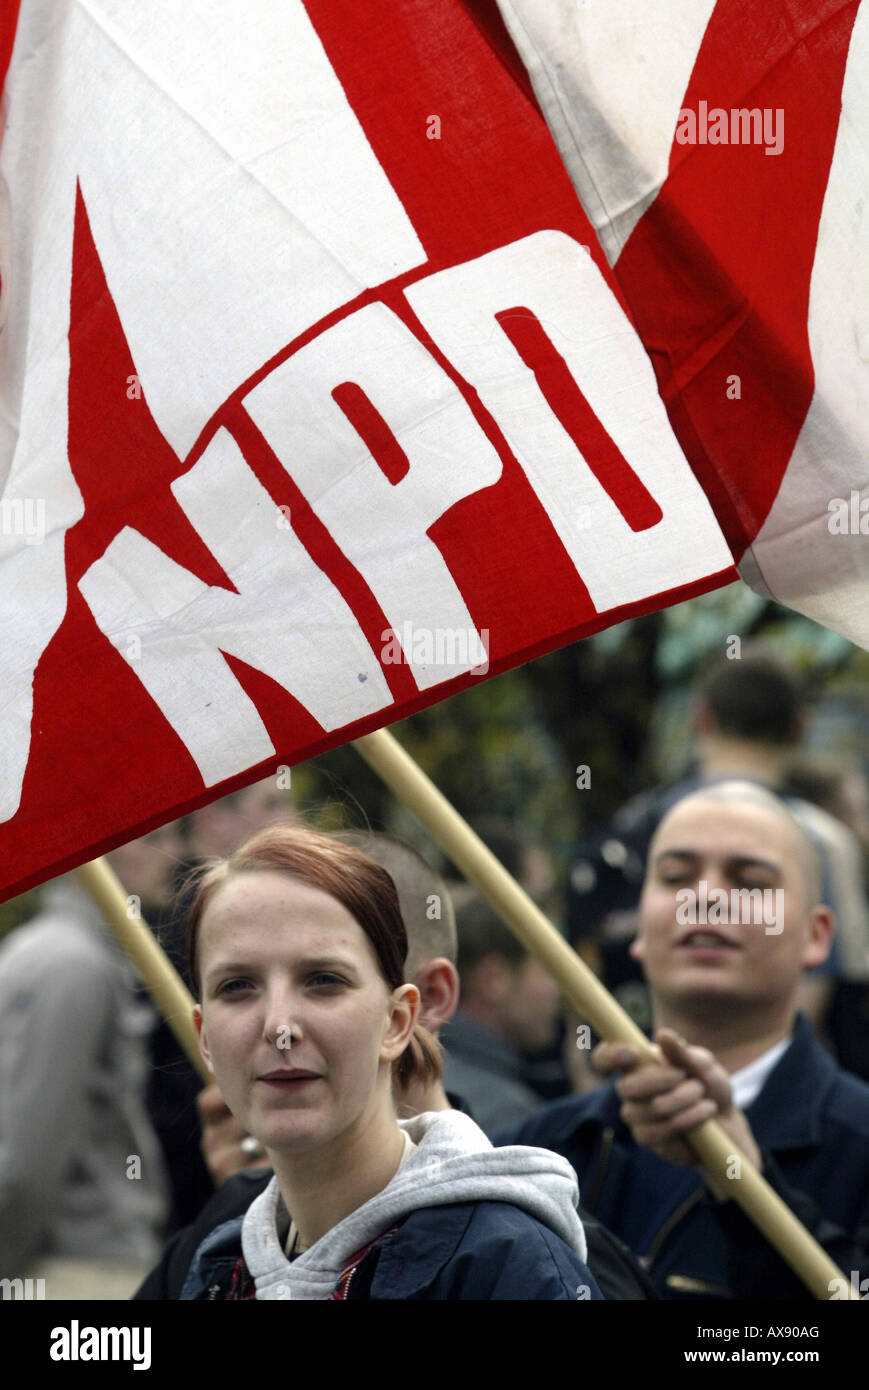 A demonstration of the nazi party NPD, Germany Stock Photo